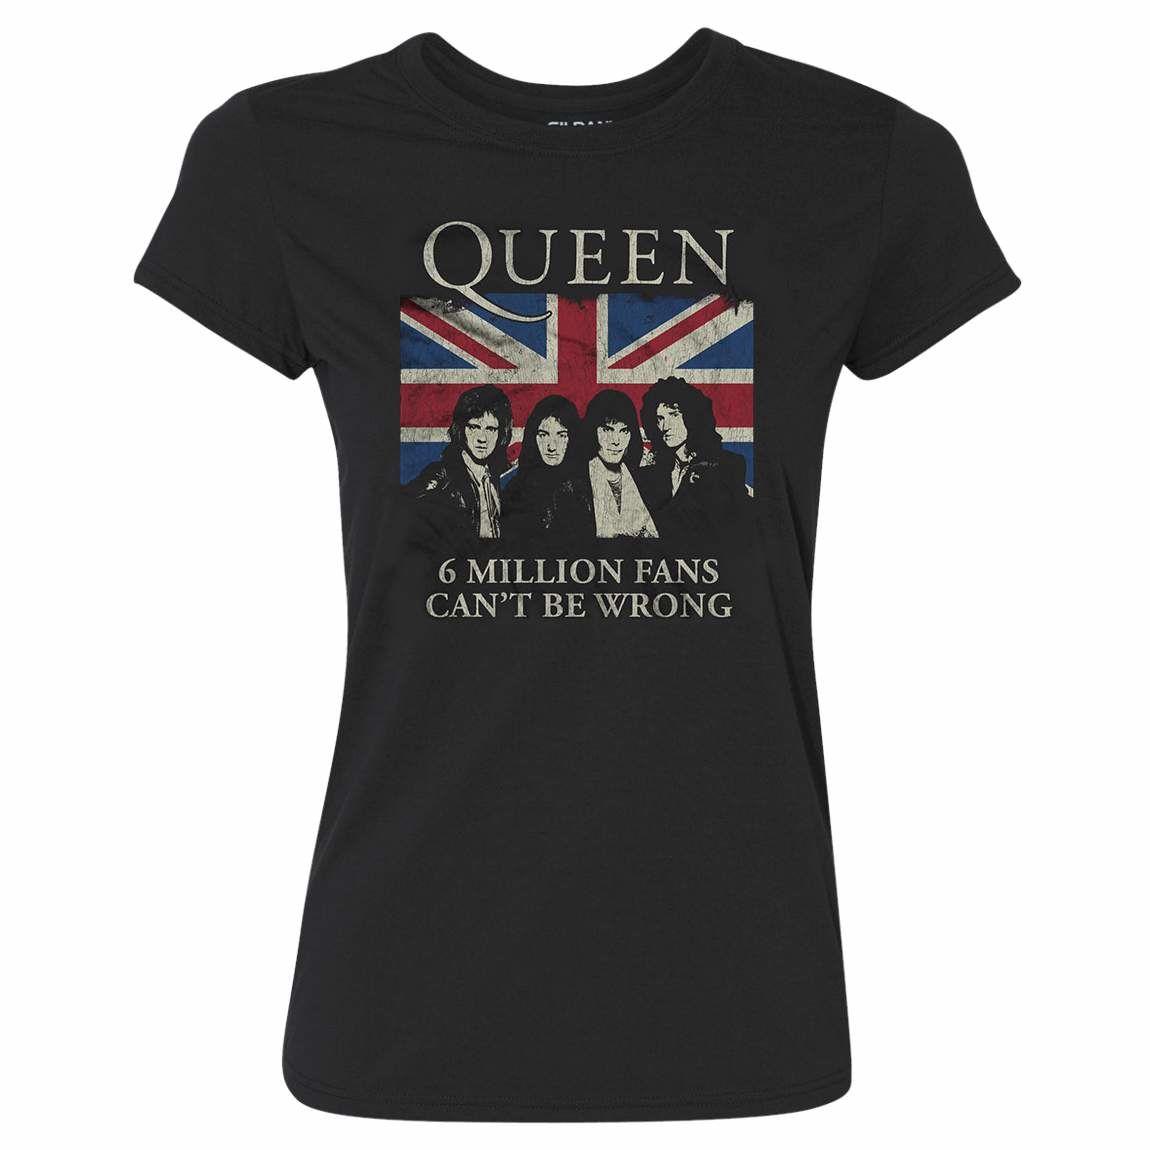 Queen - 6 Million Fans Fitted T-Shirt